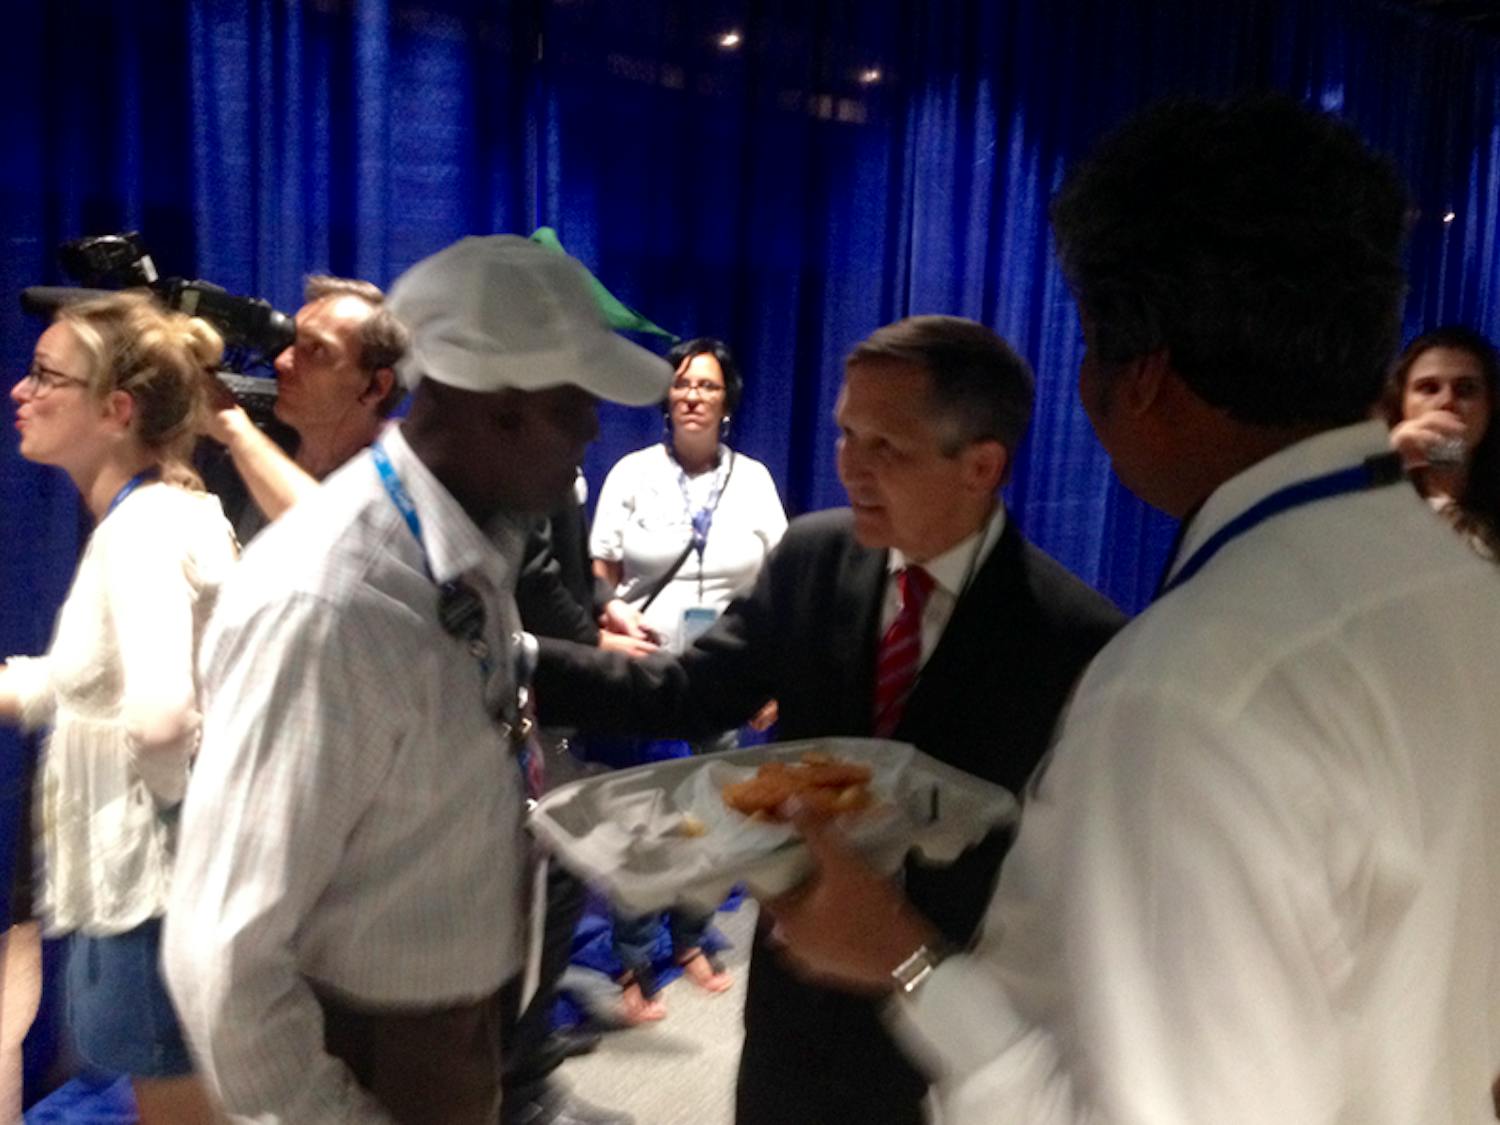 Two-time presidential candidate and former Ohio congressman Dennis Kucinich, center, chats with delegates on the first day of the Democratic National Convention in Philadelphia on July 25, 2016.